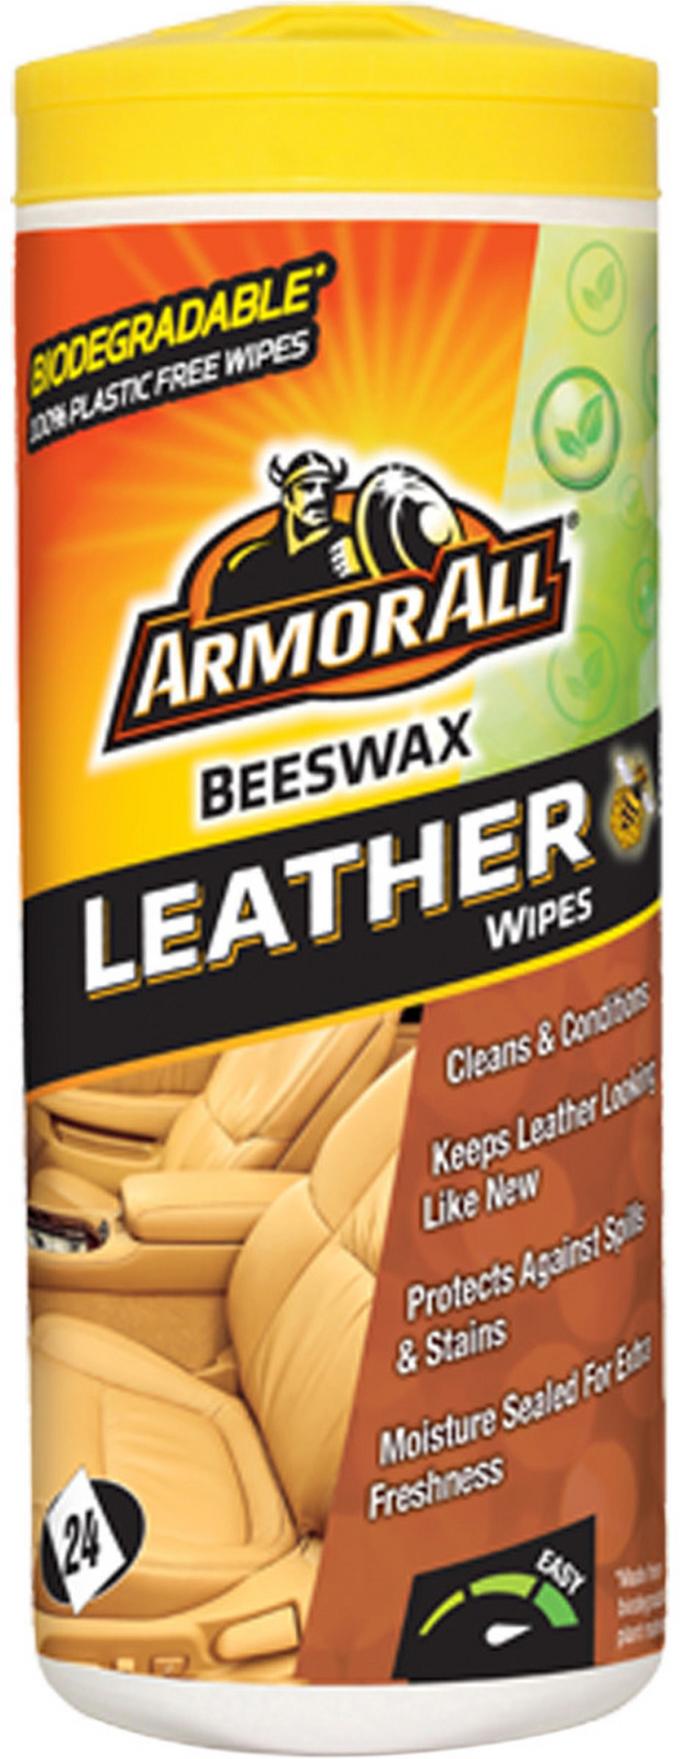 Trying Out Shine Armor Ceramic Leather Wipes! - Do They Work? 